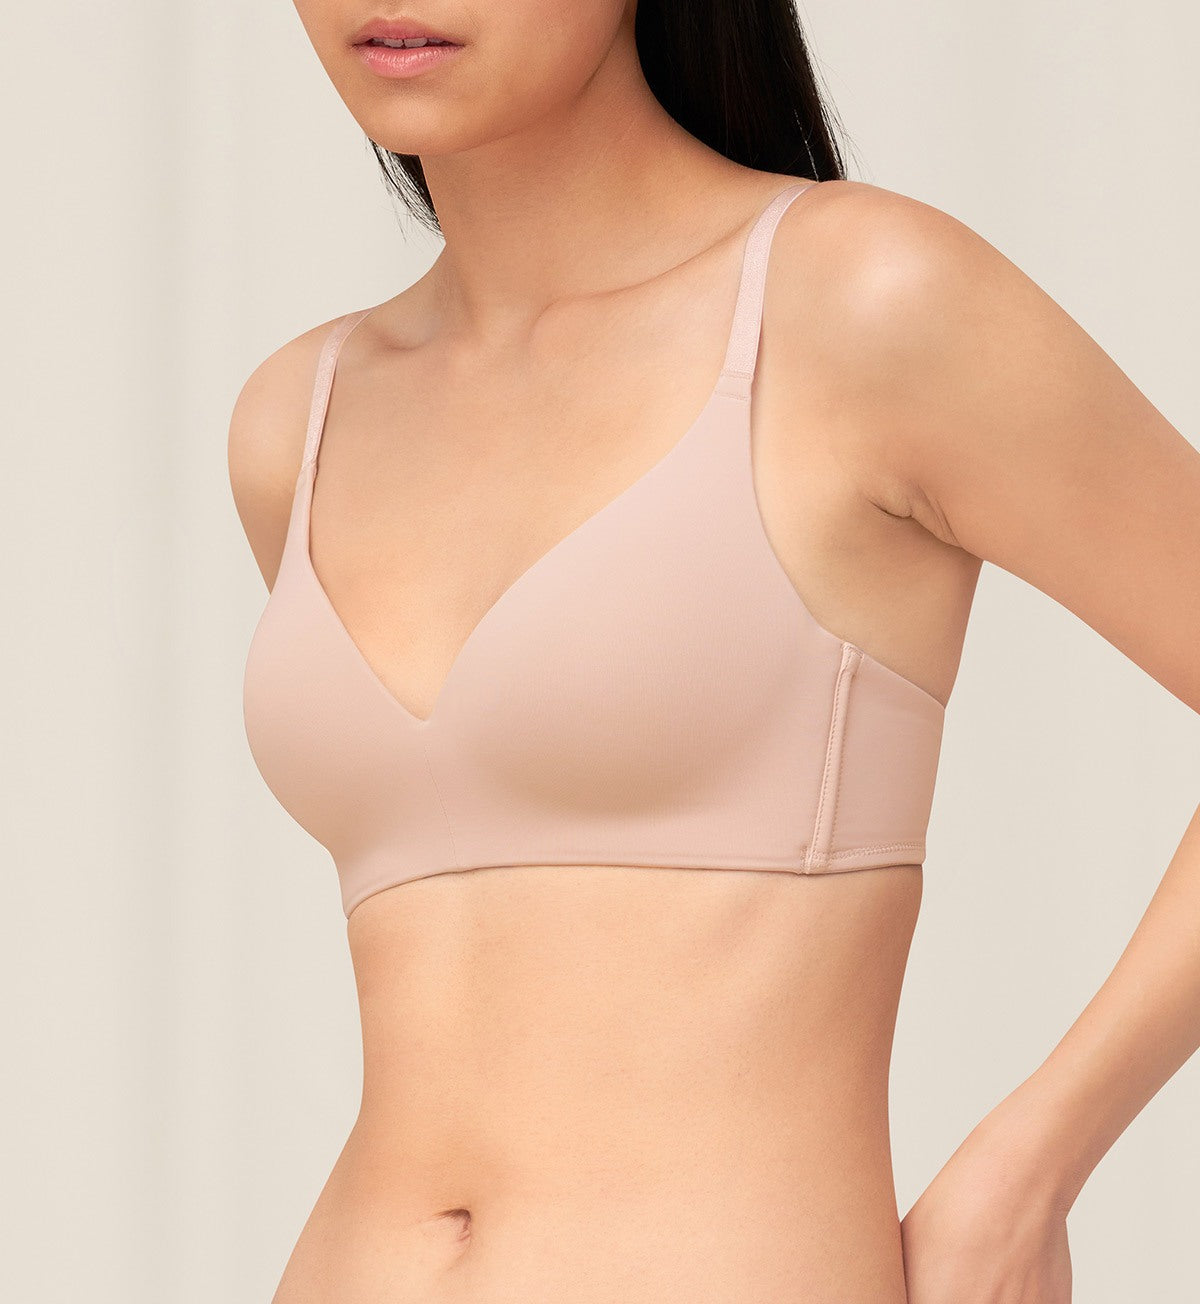 Latex Seamless Wireless Bra For Women Comfortable Push Up Sleep Top  Bralette Without Breast Bone And Underwire From Micandy, $15.55